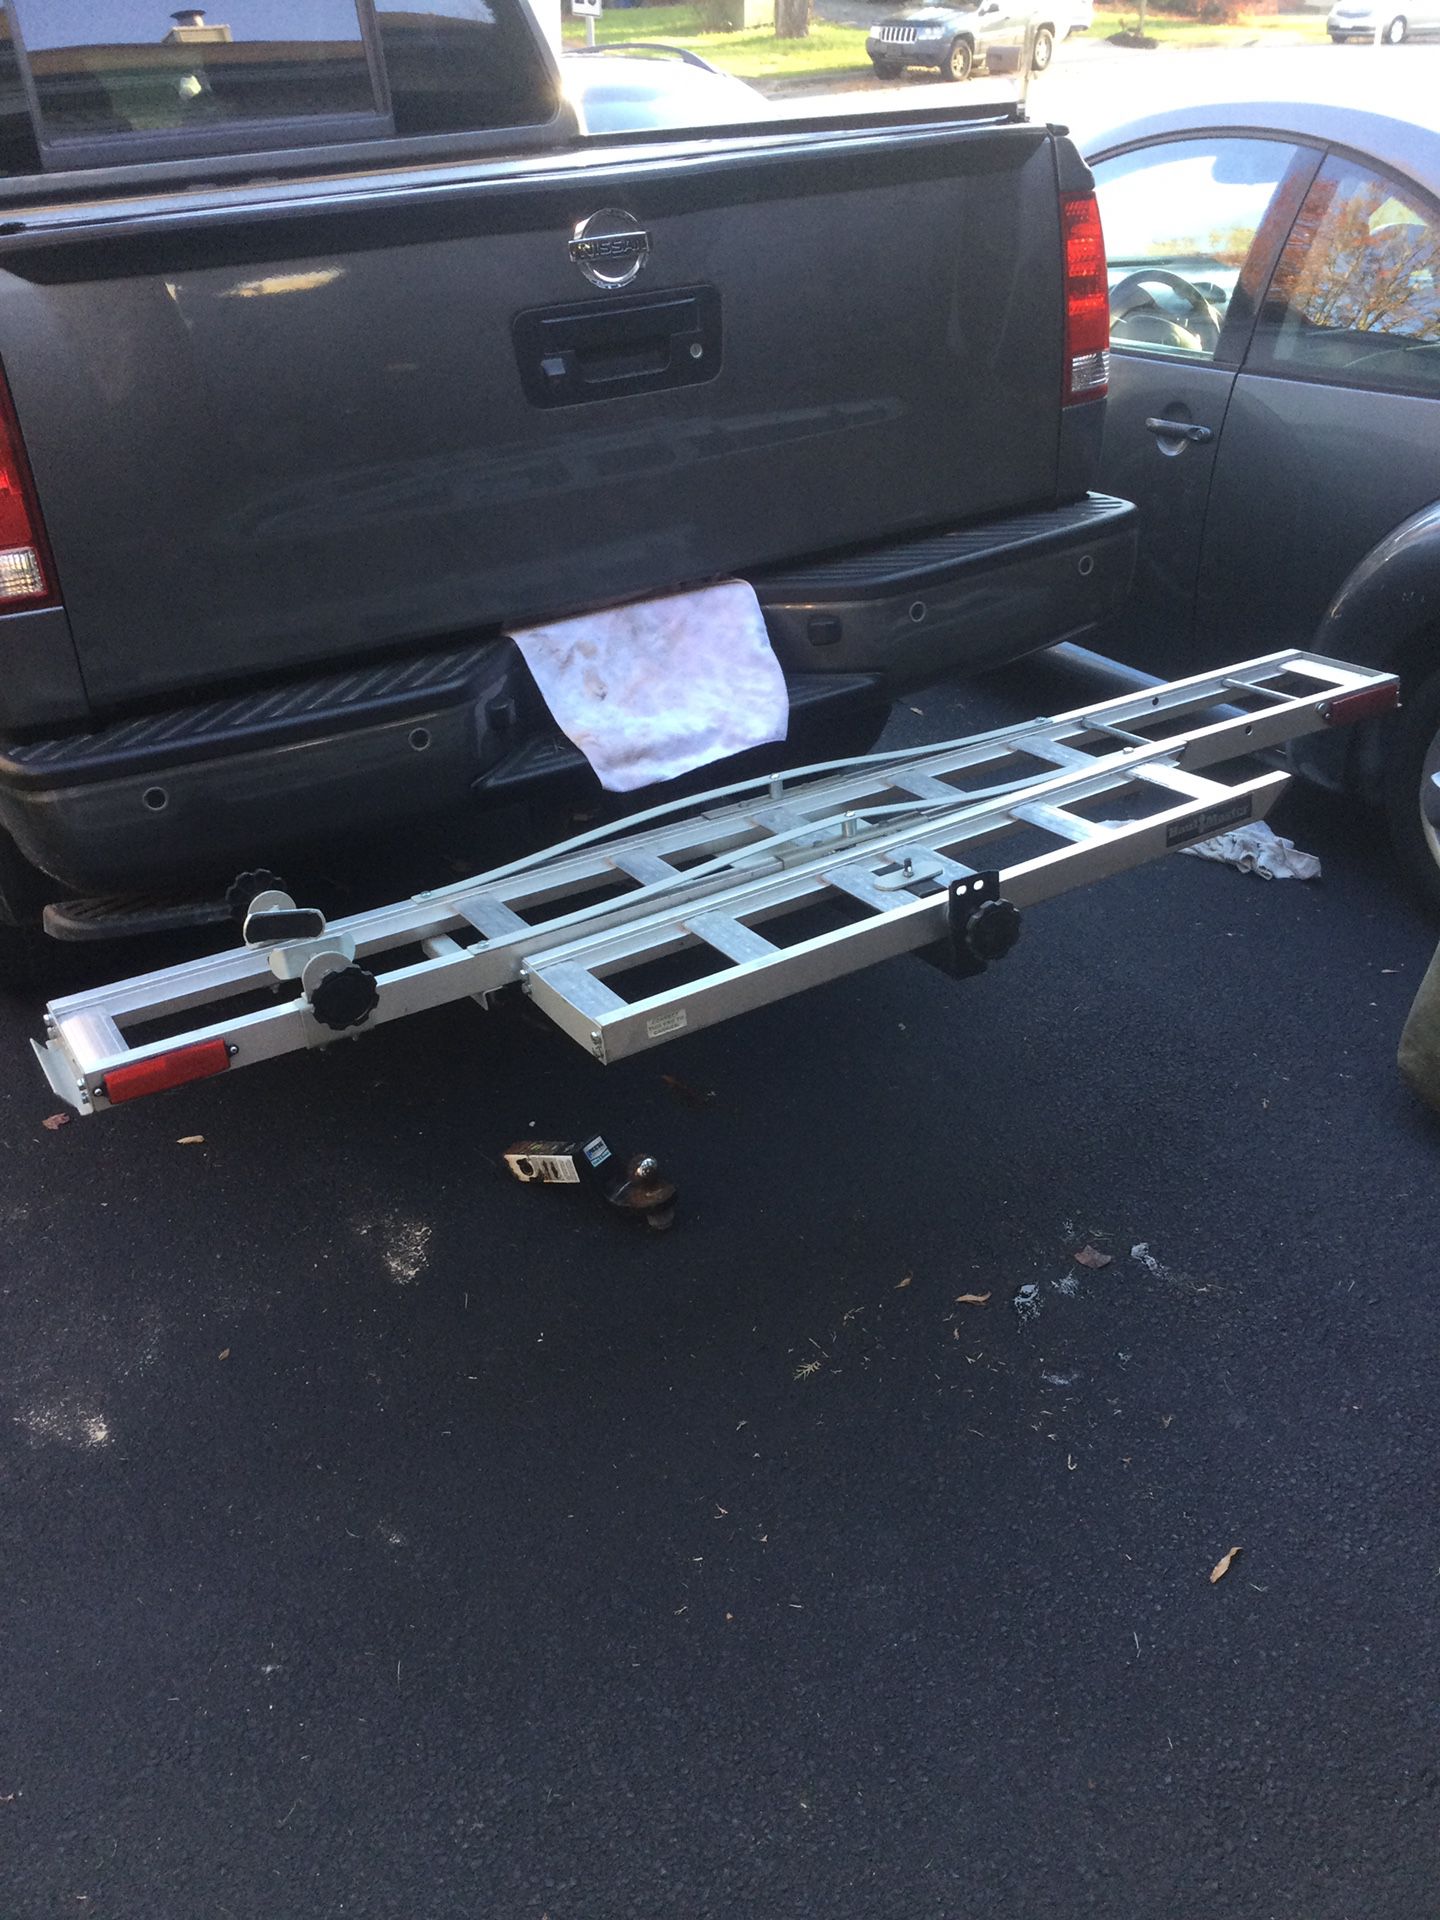 Aluminum Dirt Bike Motorcycle Tow Hitch Carrier Rack- 450 pound capacity approximately